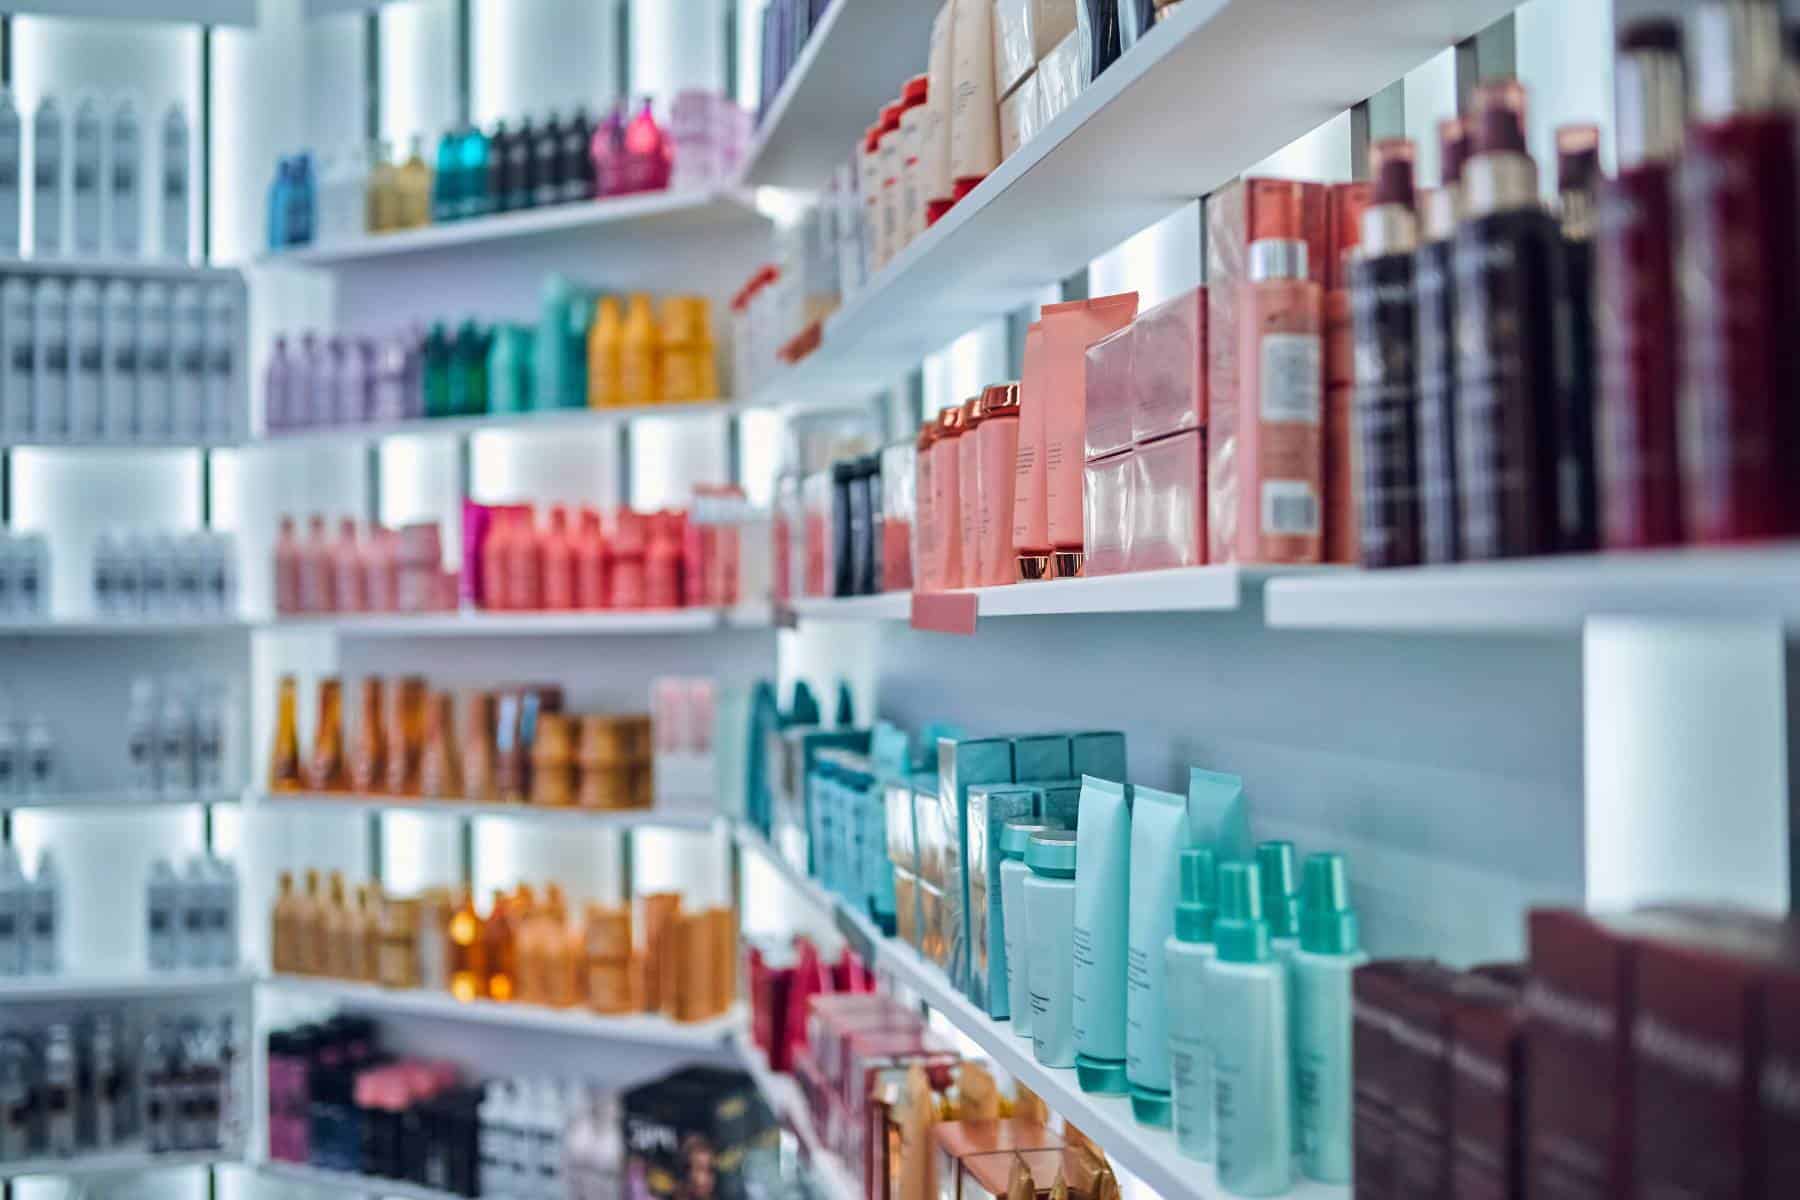 Shelves full of Hair Products